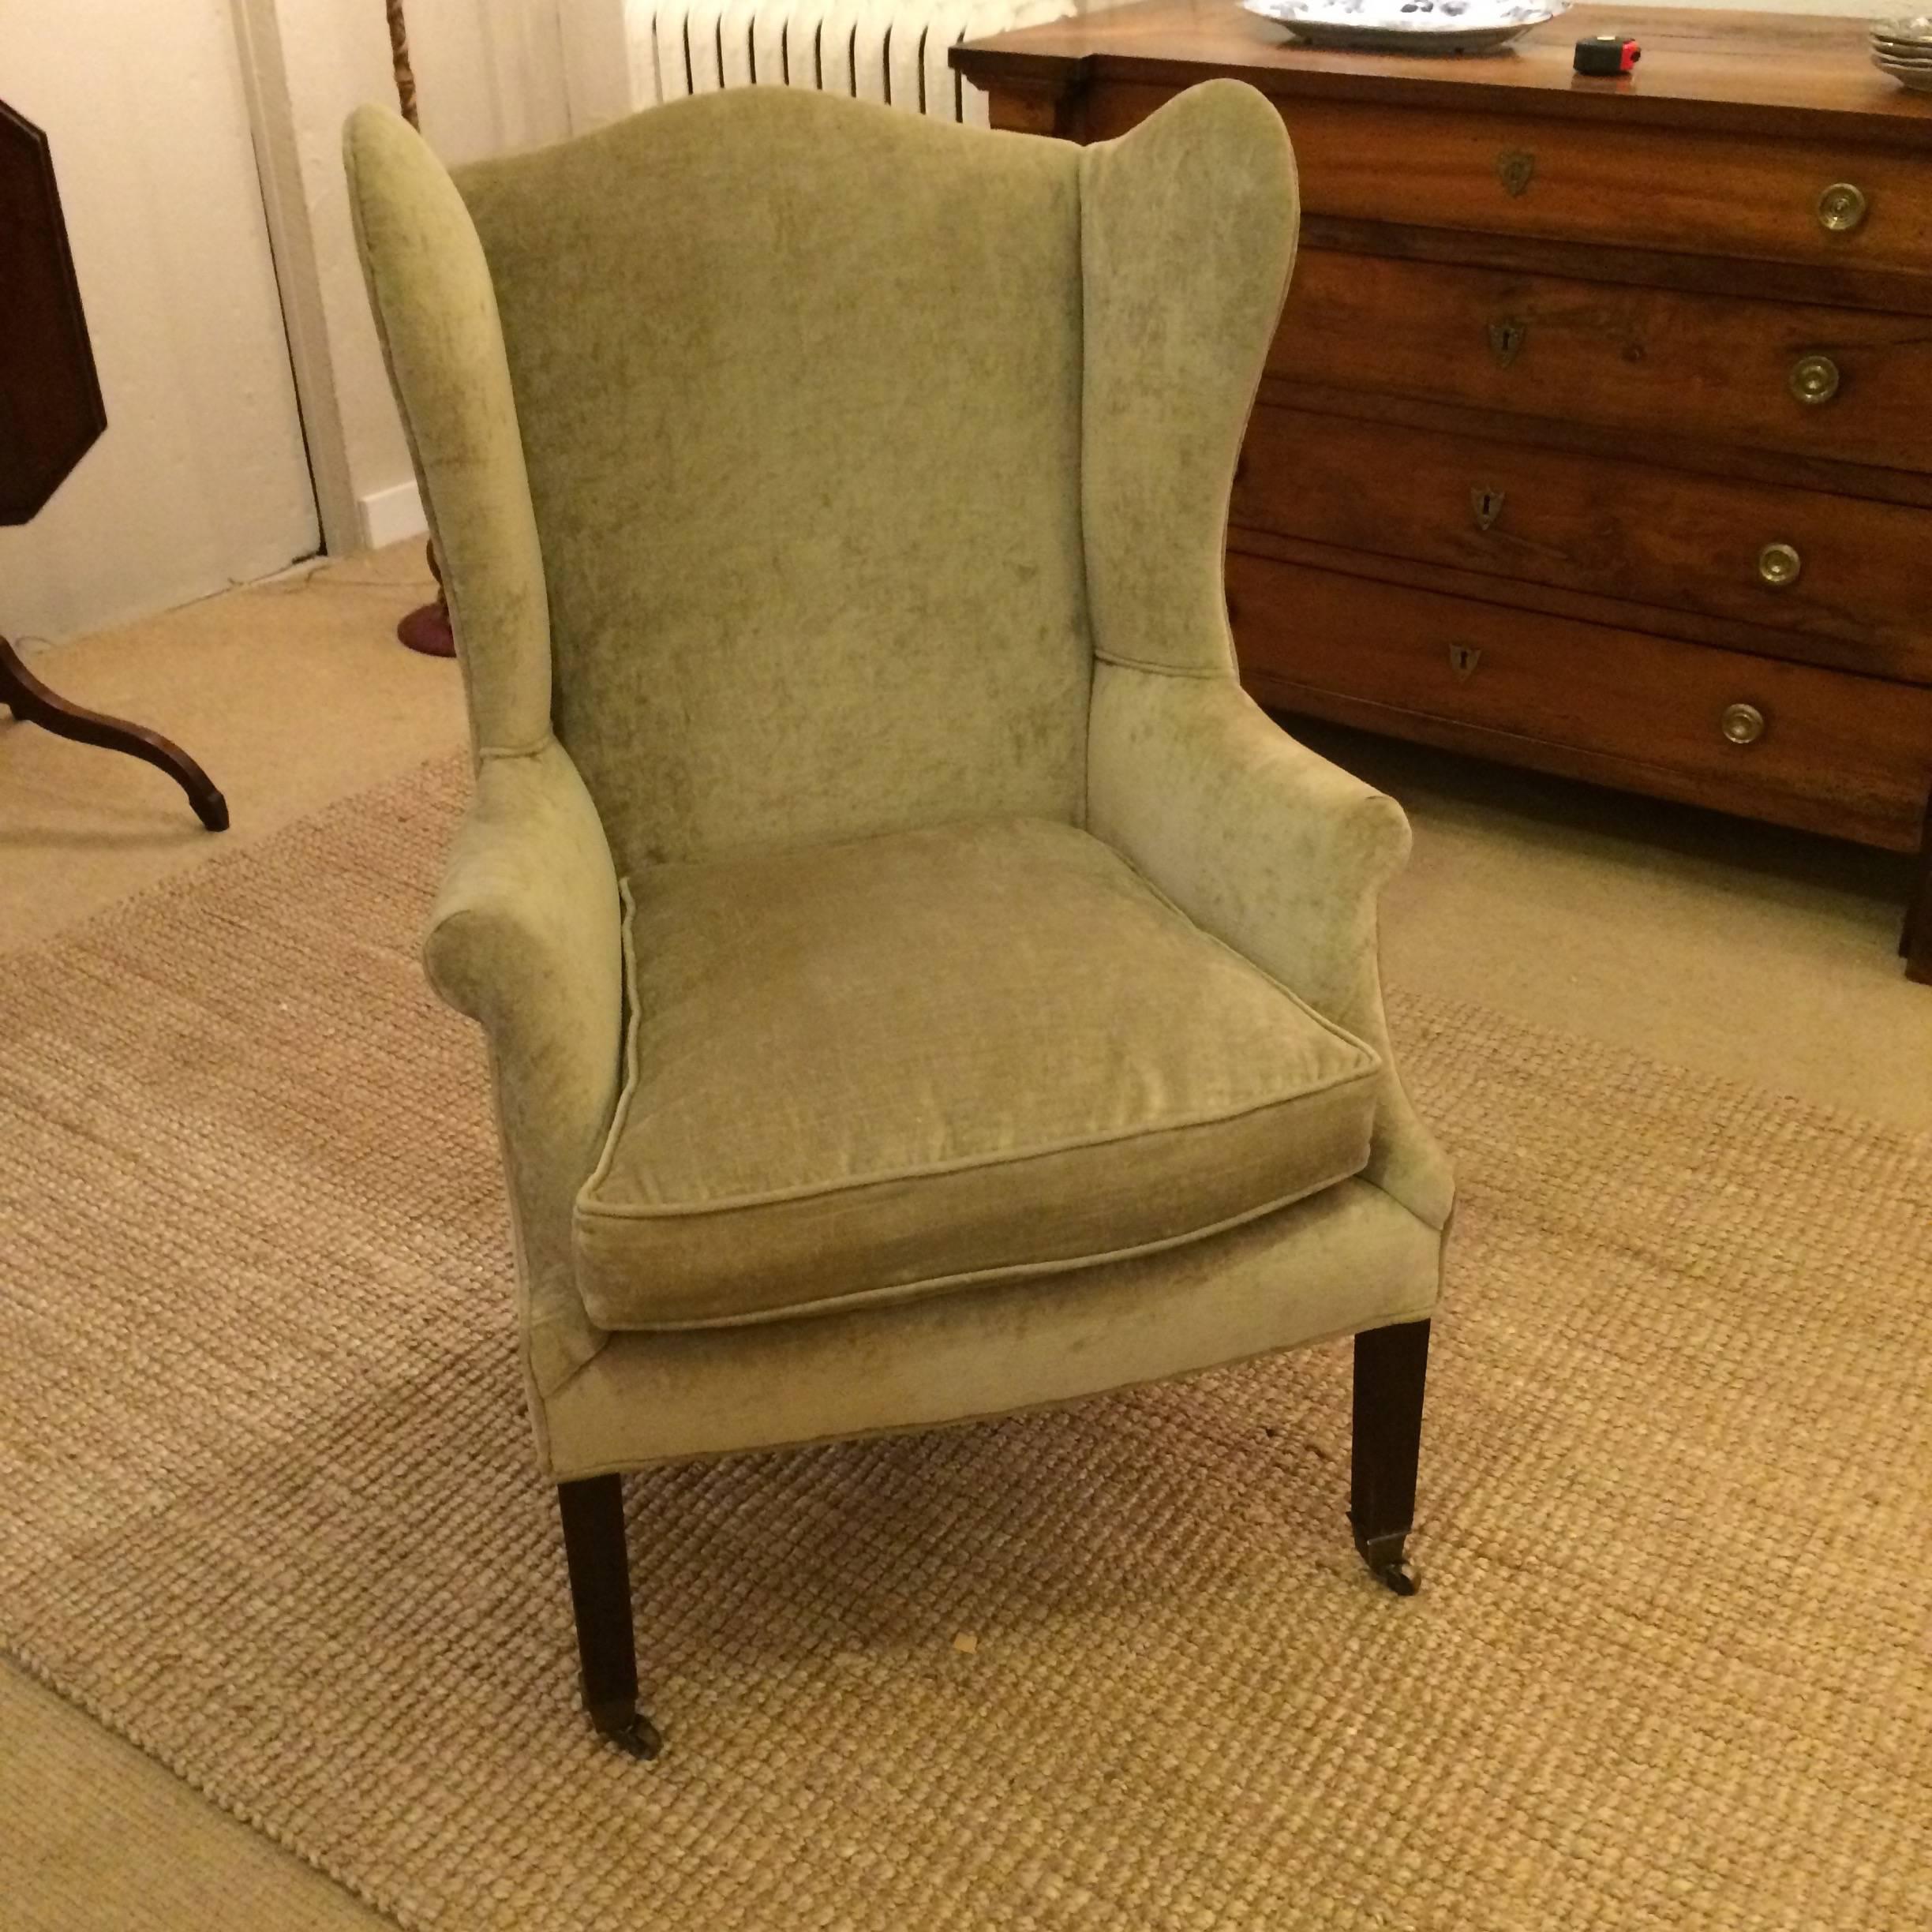 Classically elegant wing chair with mahogany legs and brass casters, newly upholstered in neutral soft sage green velvet with down cushion.
Arm width 29.
Back width 27.
seat width 21.